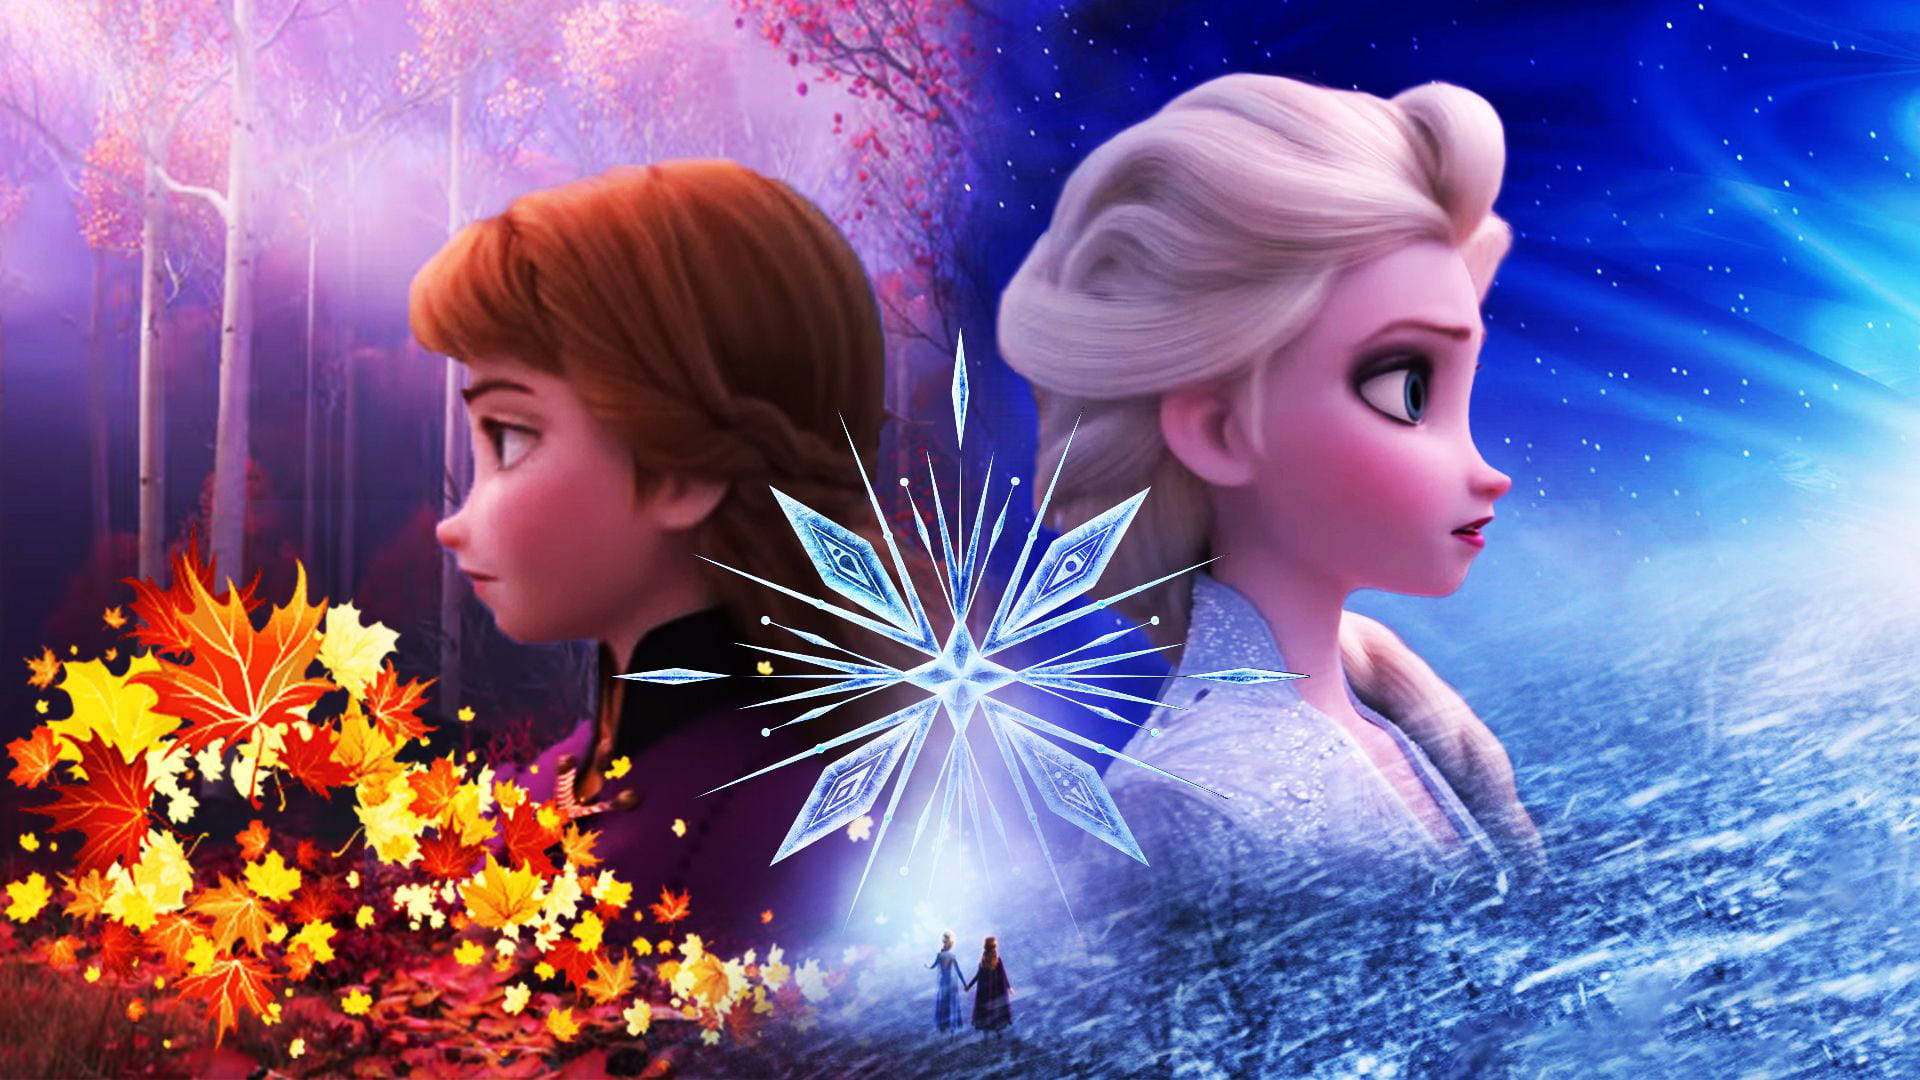 Free Elsa And Anna Wallpaper Downloads, [100+] Elsa And Anna Wallpapers for  FREE 